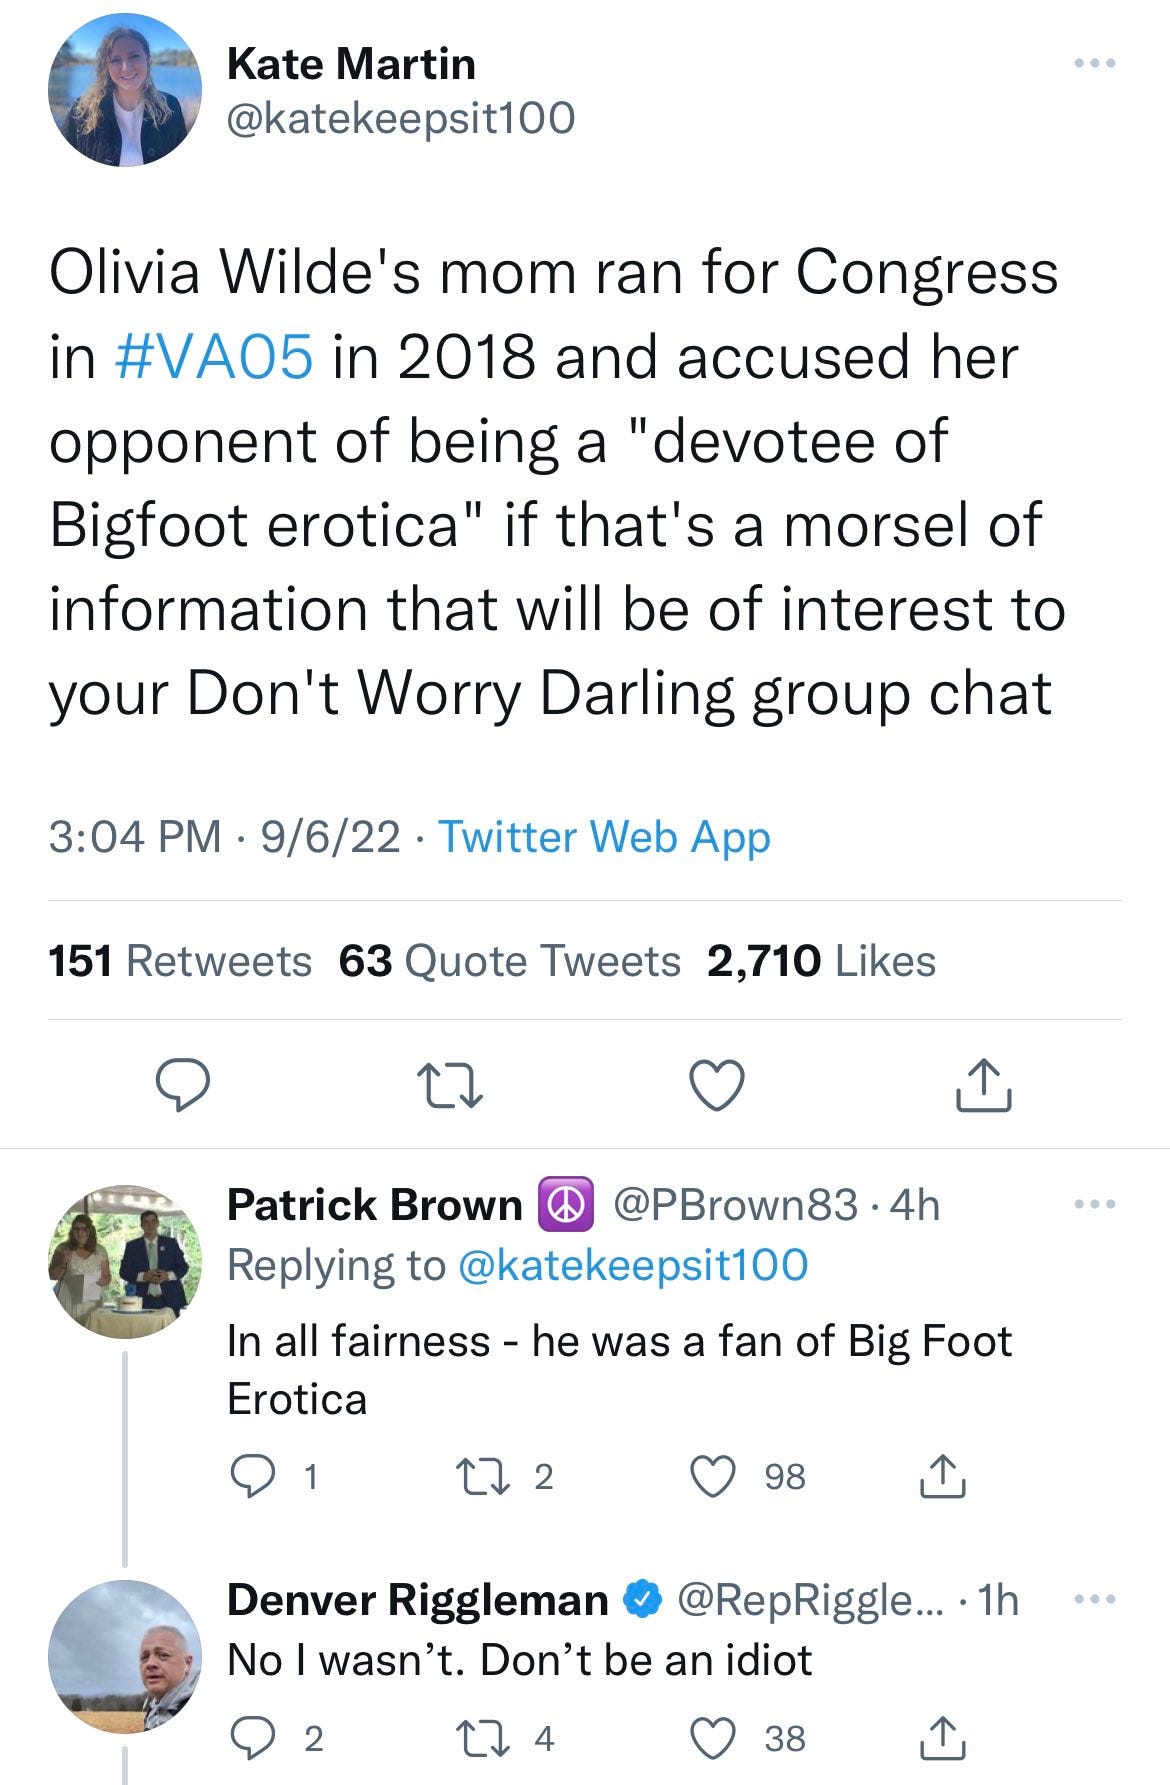 Twitter thread starting with Kate Martin’s tweet: “Olivia Wilde's mom ran for Congress in #VA05 in 2018 and accused her opponent of being a "devotee of Bigfoot erotica" if that's a morsel of information that will be of interest to your Don't Worry Darling group chat”, followed by a reply from Patrick Brown that says “In all fairness - he was a fan of Big Foot Erotica,” after which Denver Riggleman himself pops up replying ”No I wasn’t. Don’t be an idiot.” 